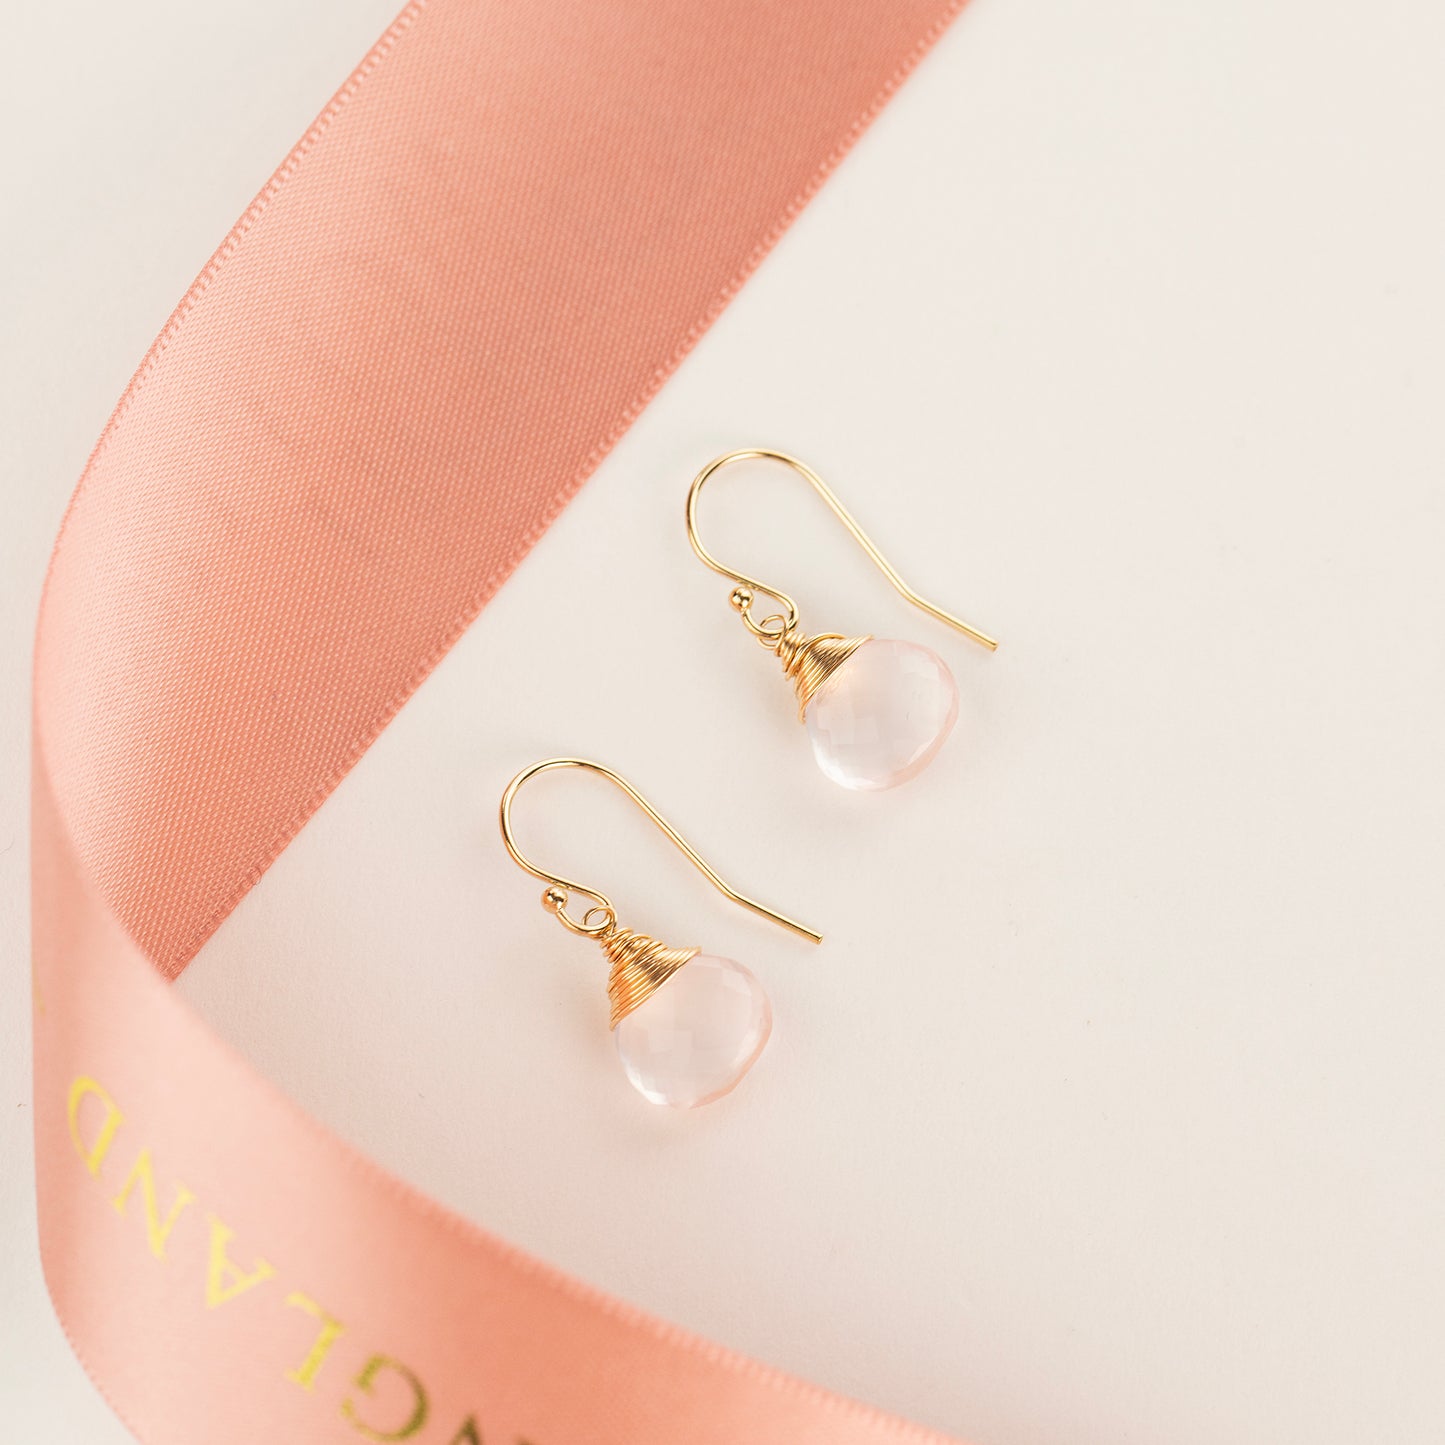 Rose Quartz Earrings - Unconditional Love - Silver, Gold & Rose Gold